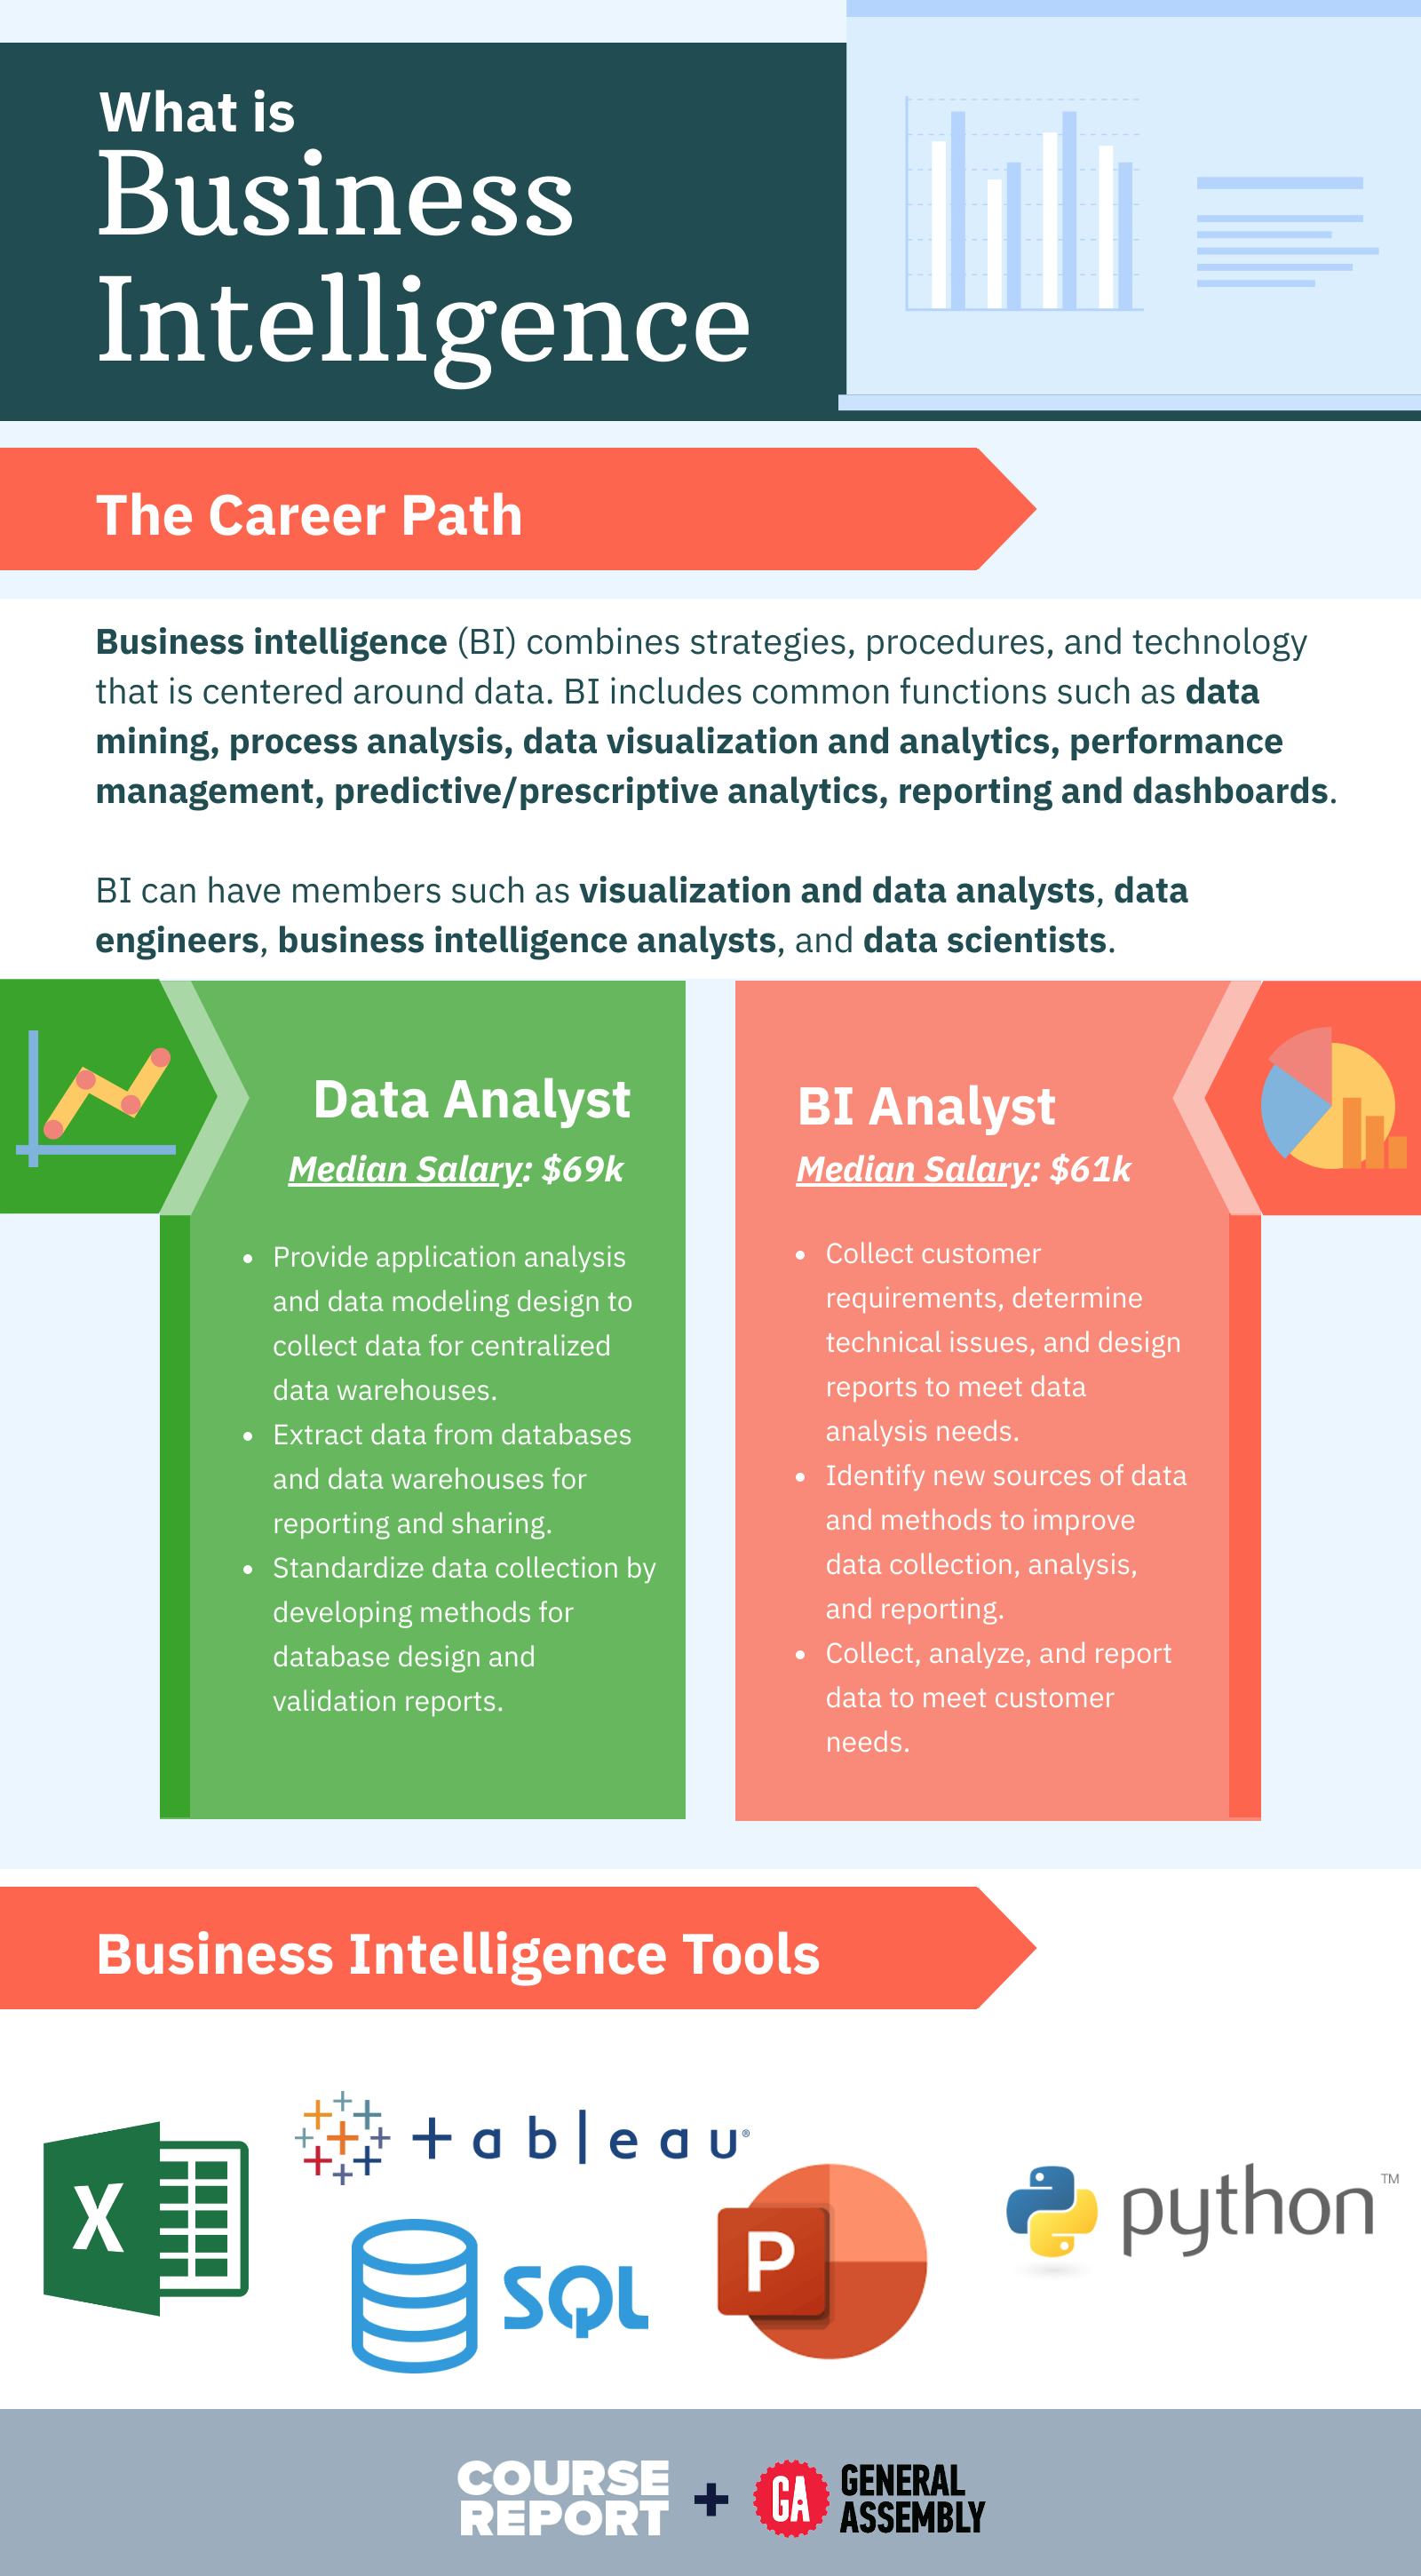 How to Become a Business Intelligence Analyst | Course Report